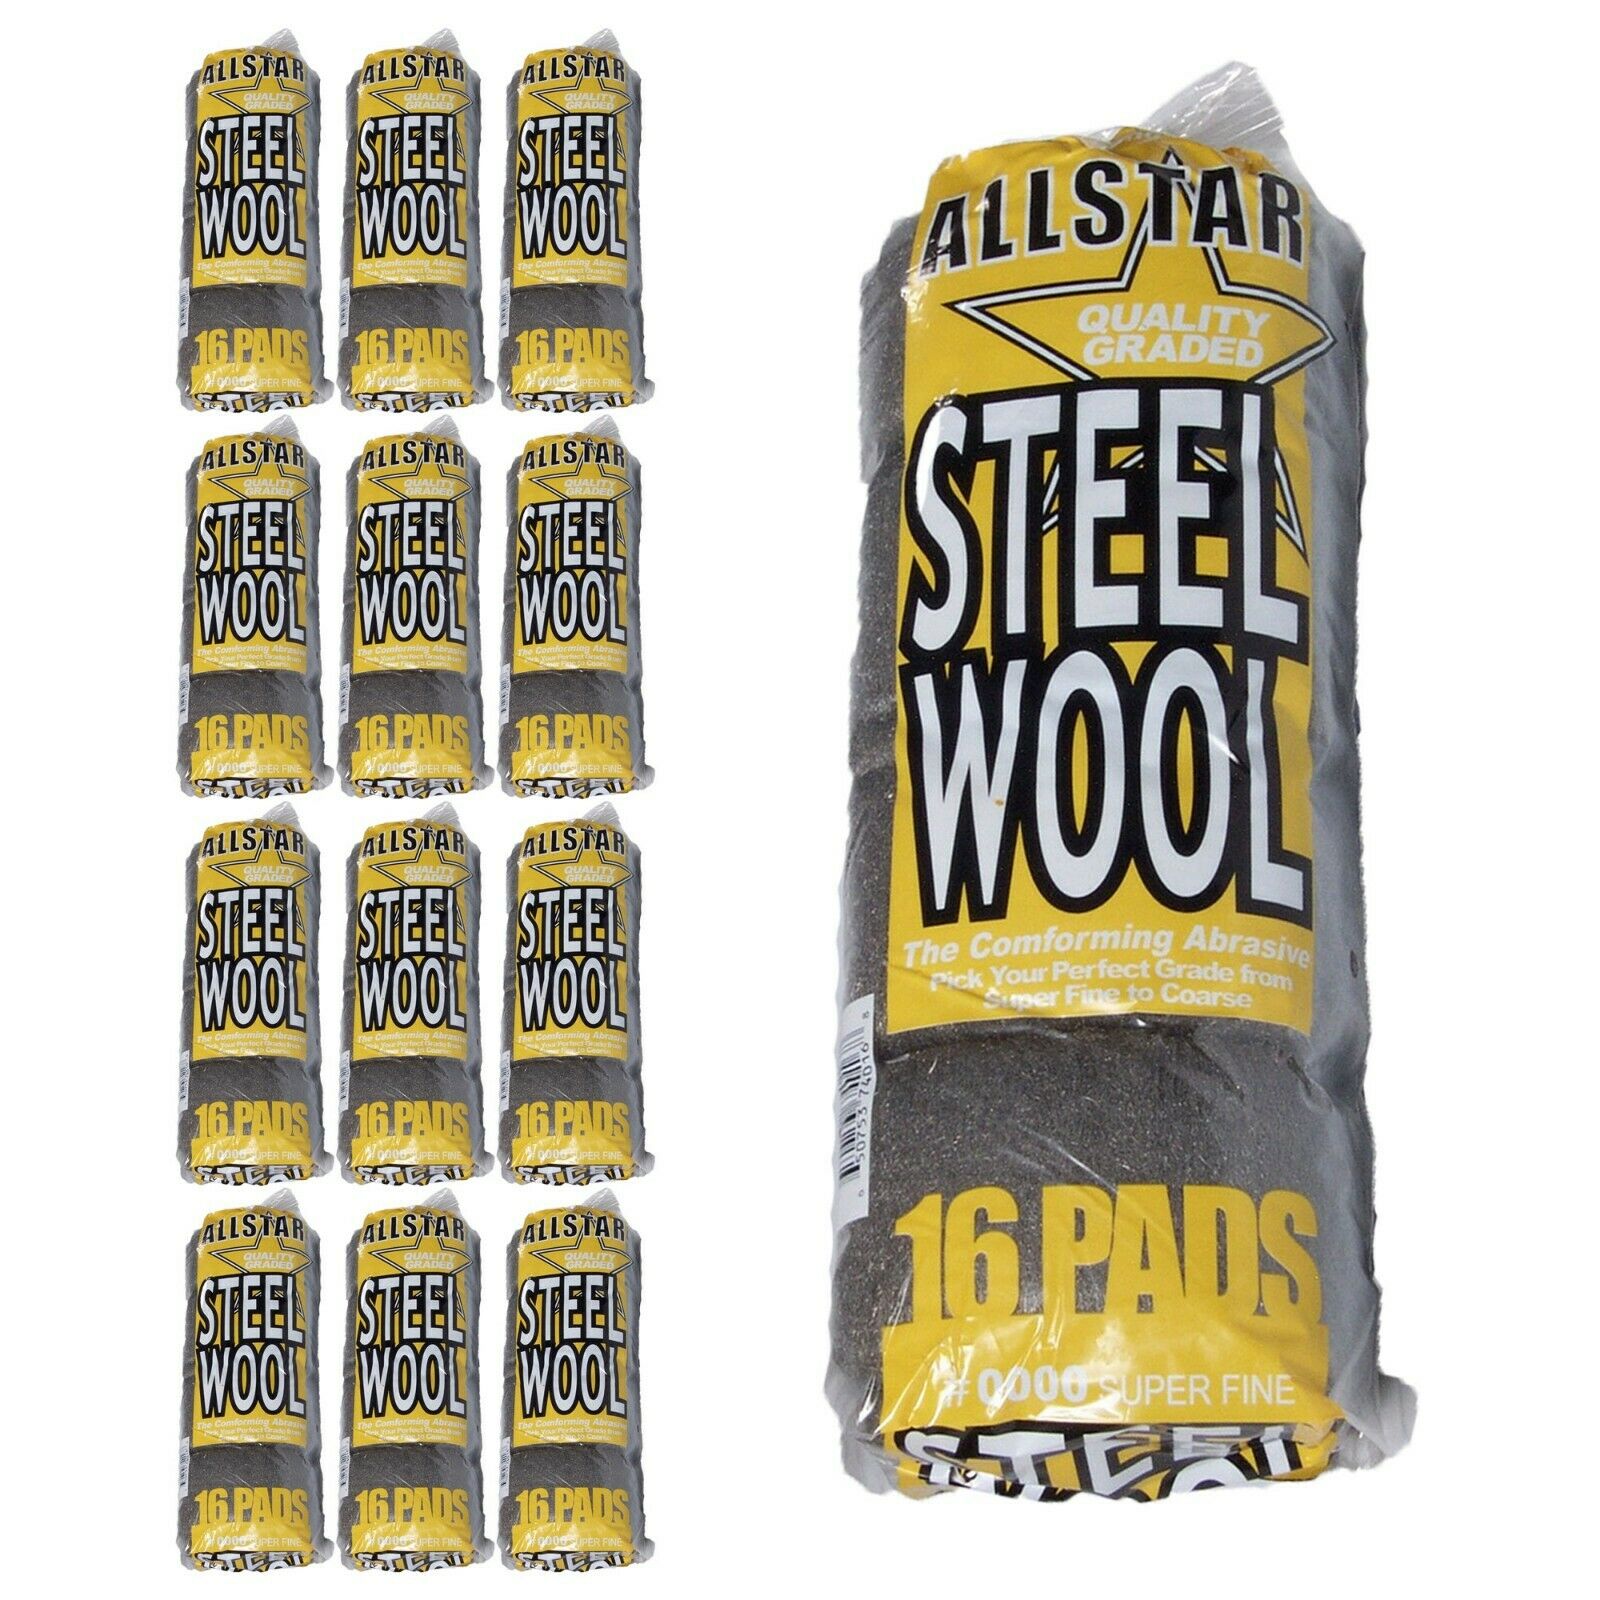 0000 Steel Wool Pads Auto Detailing (case Of 12 Packs - 192 Pads)